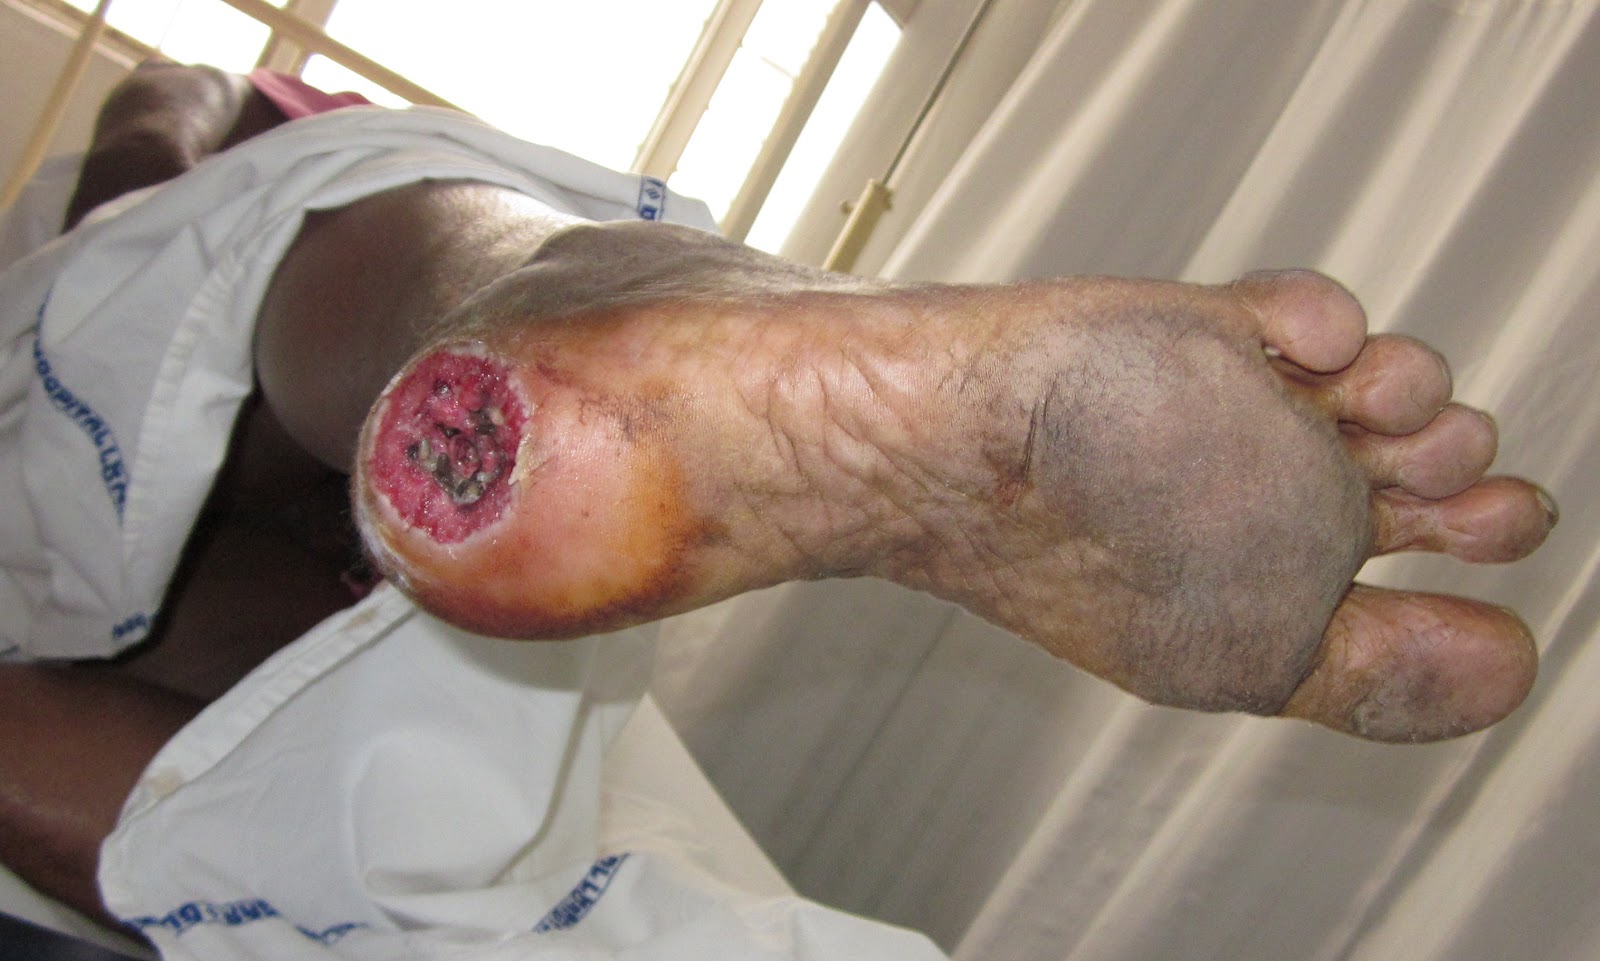 Diabetic Foot Infection With Maggots